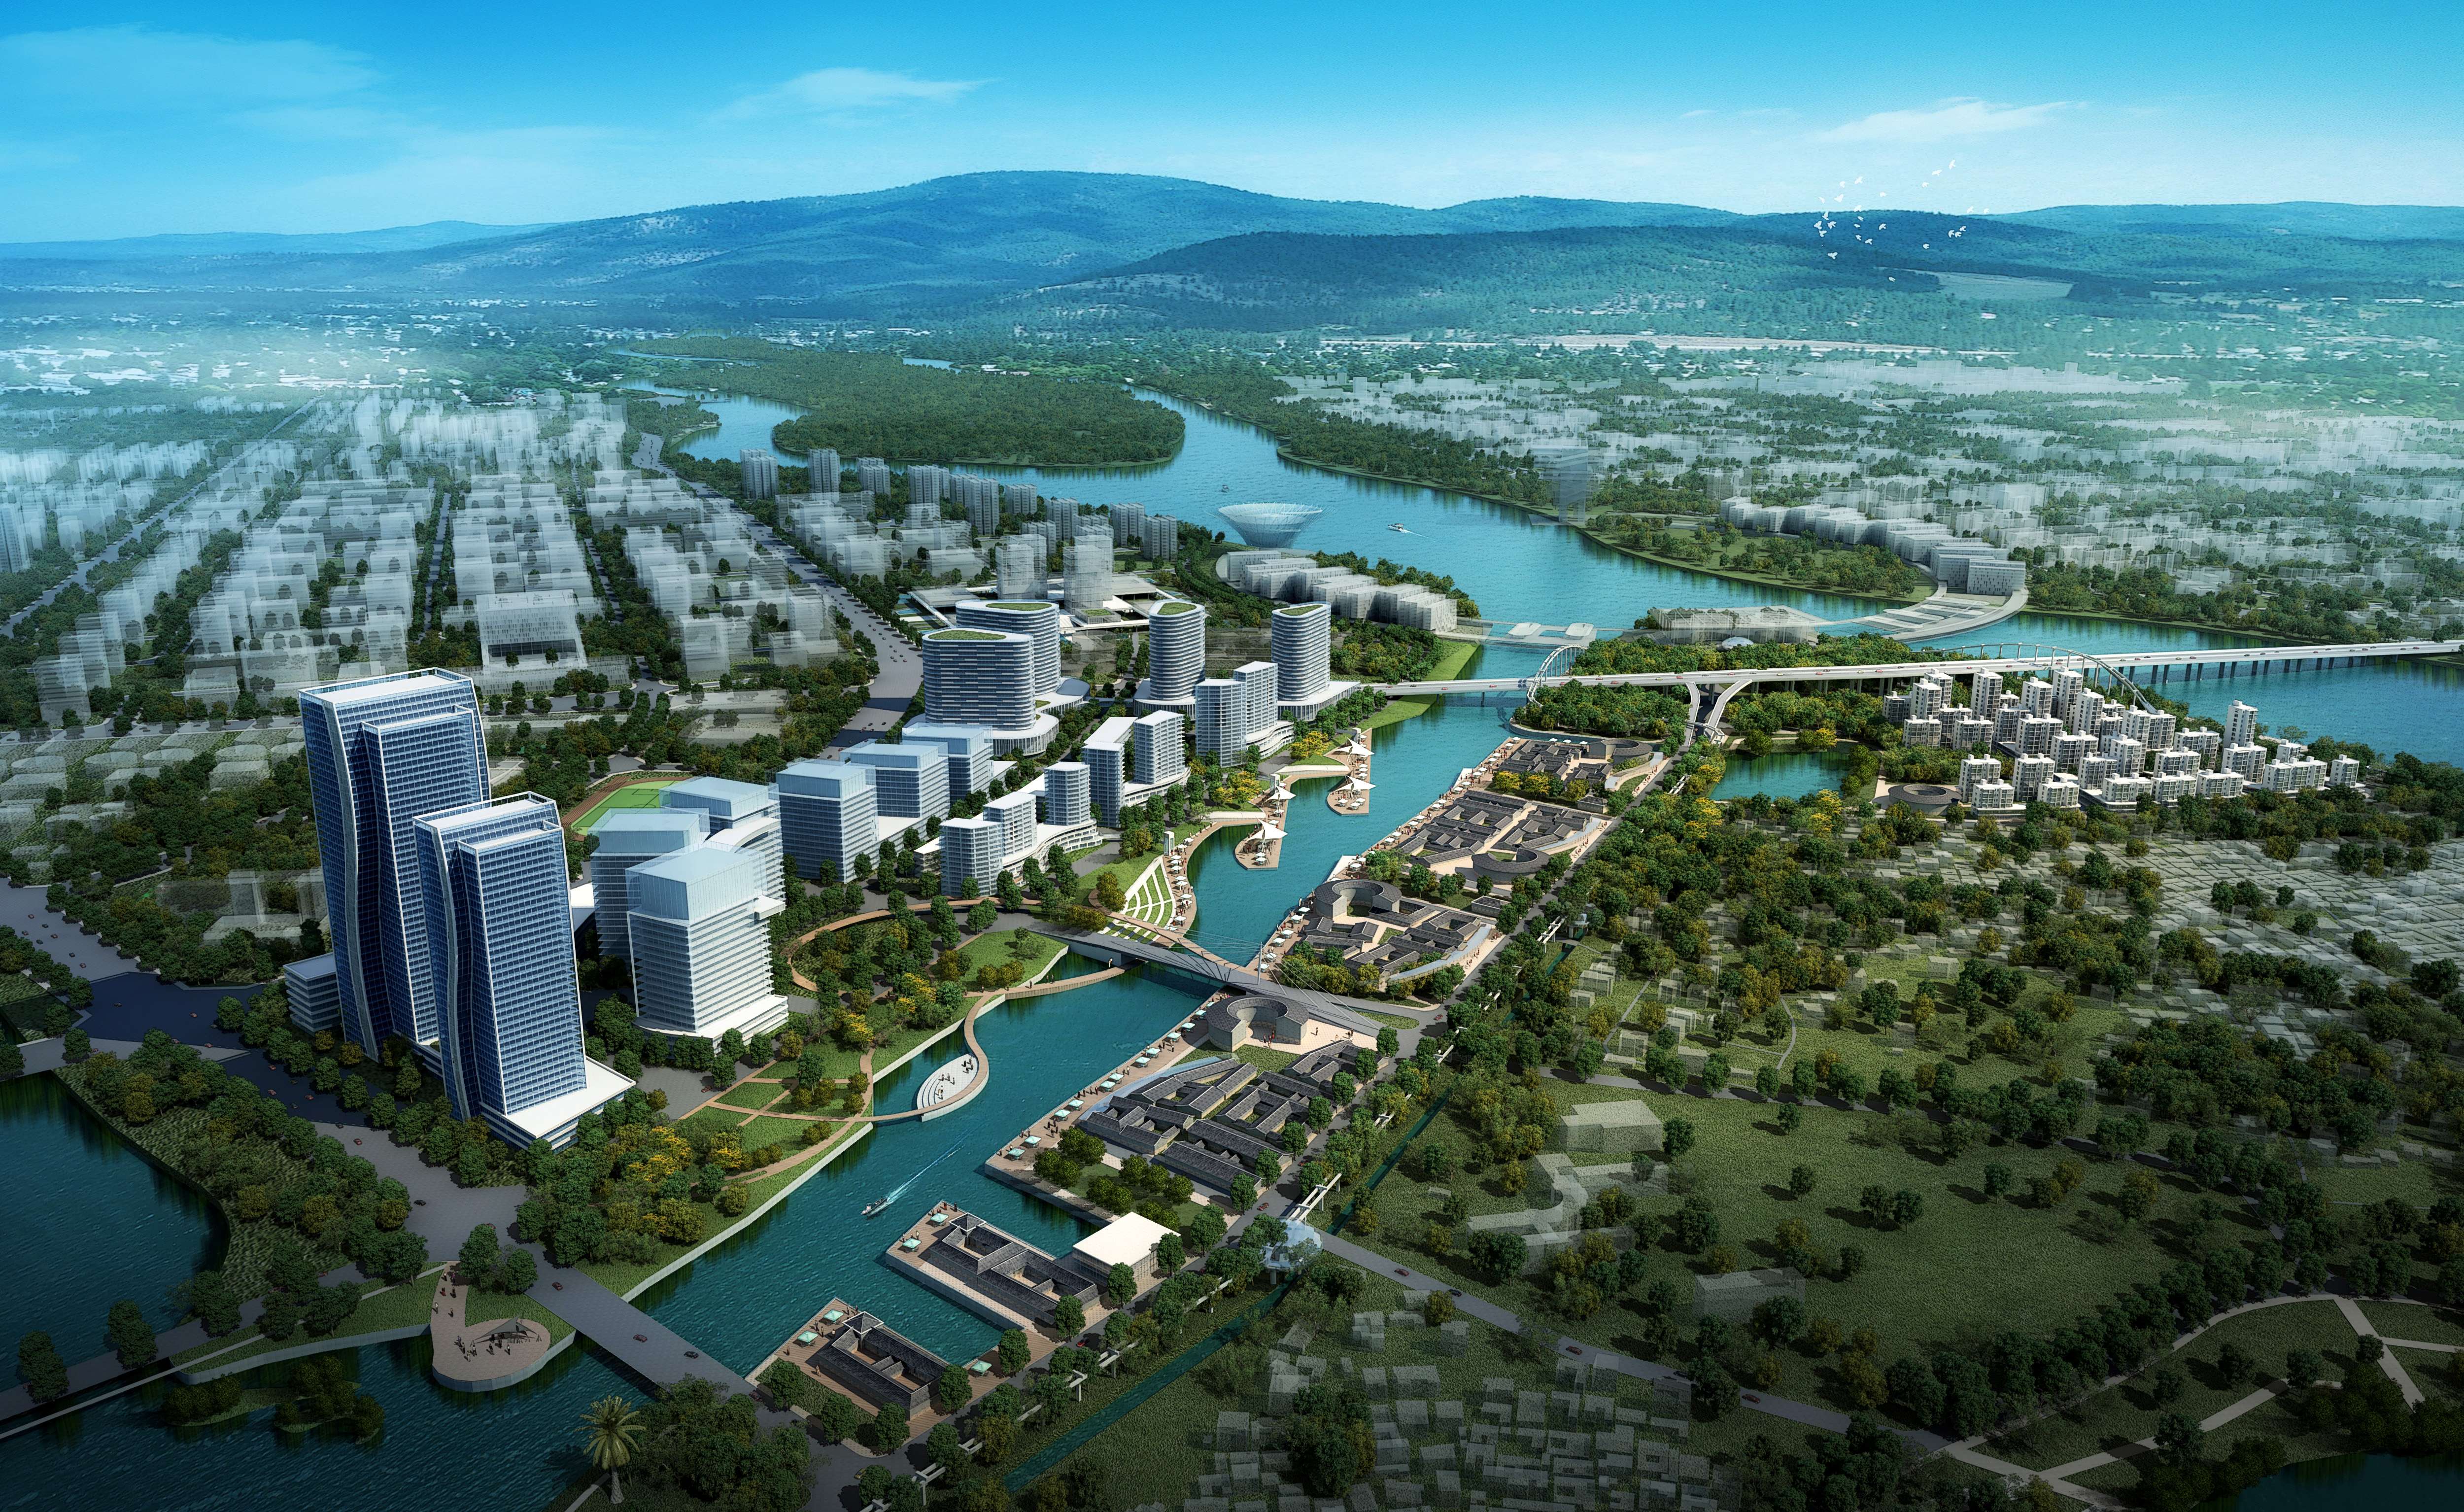 Bingzhou New Town is proof that a more environmentally and socially conscious approach to urbanisation can work.